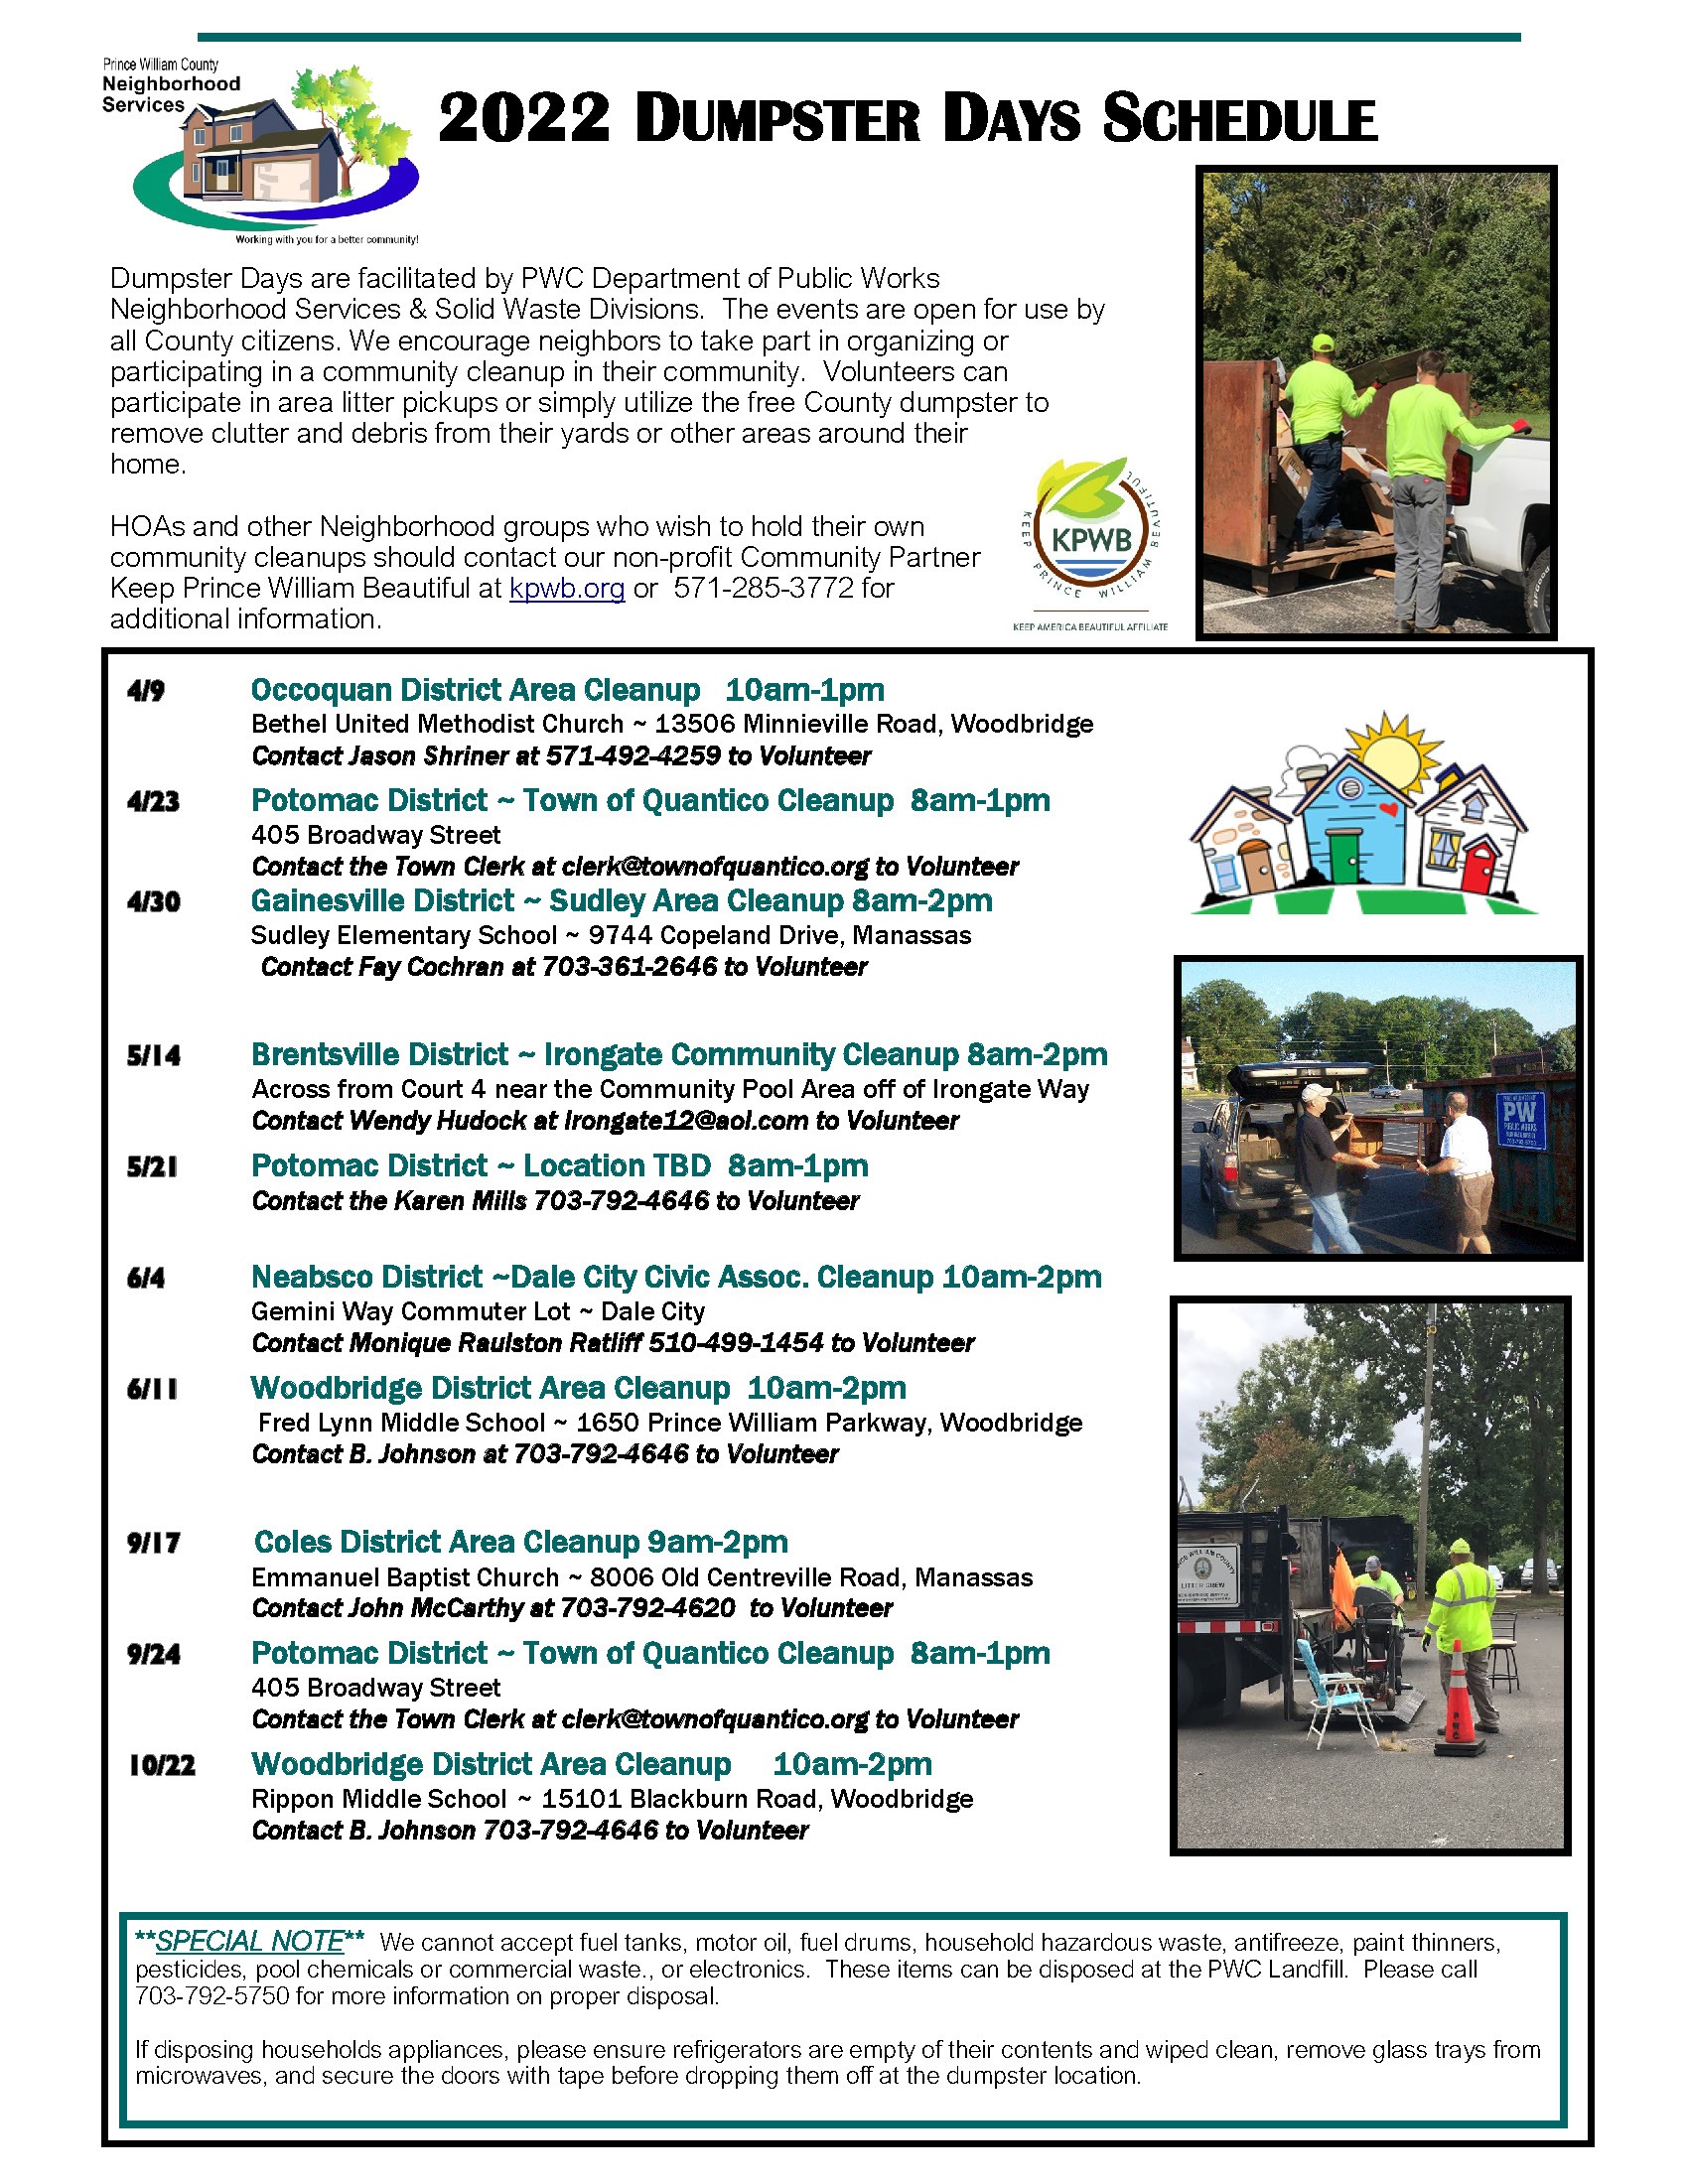 Dumpster Days Schedule 2022 FINAL - 2022 DUMPSTER DAYS: Potomac District ~ Town of Quantico Cleanup